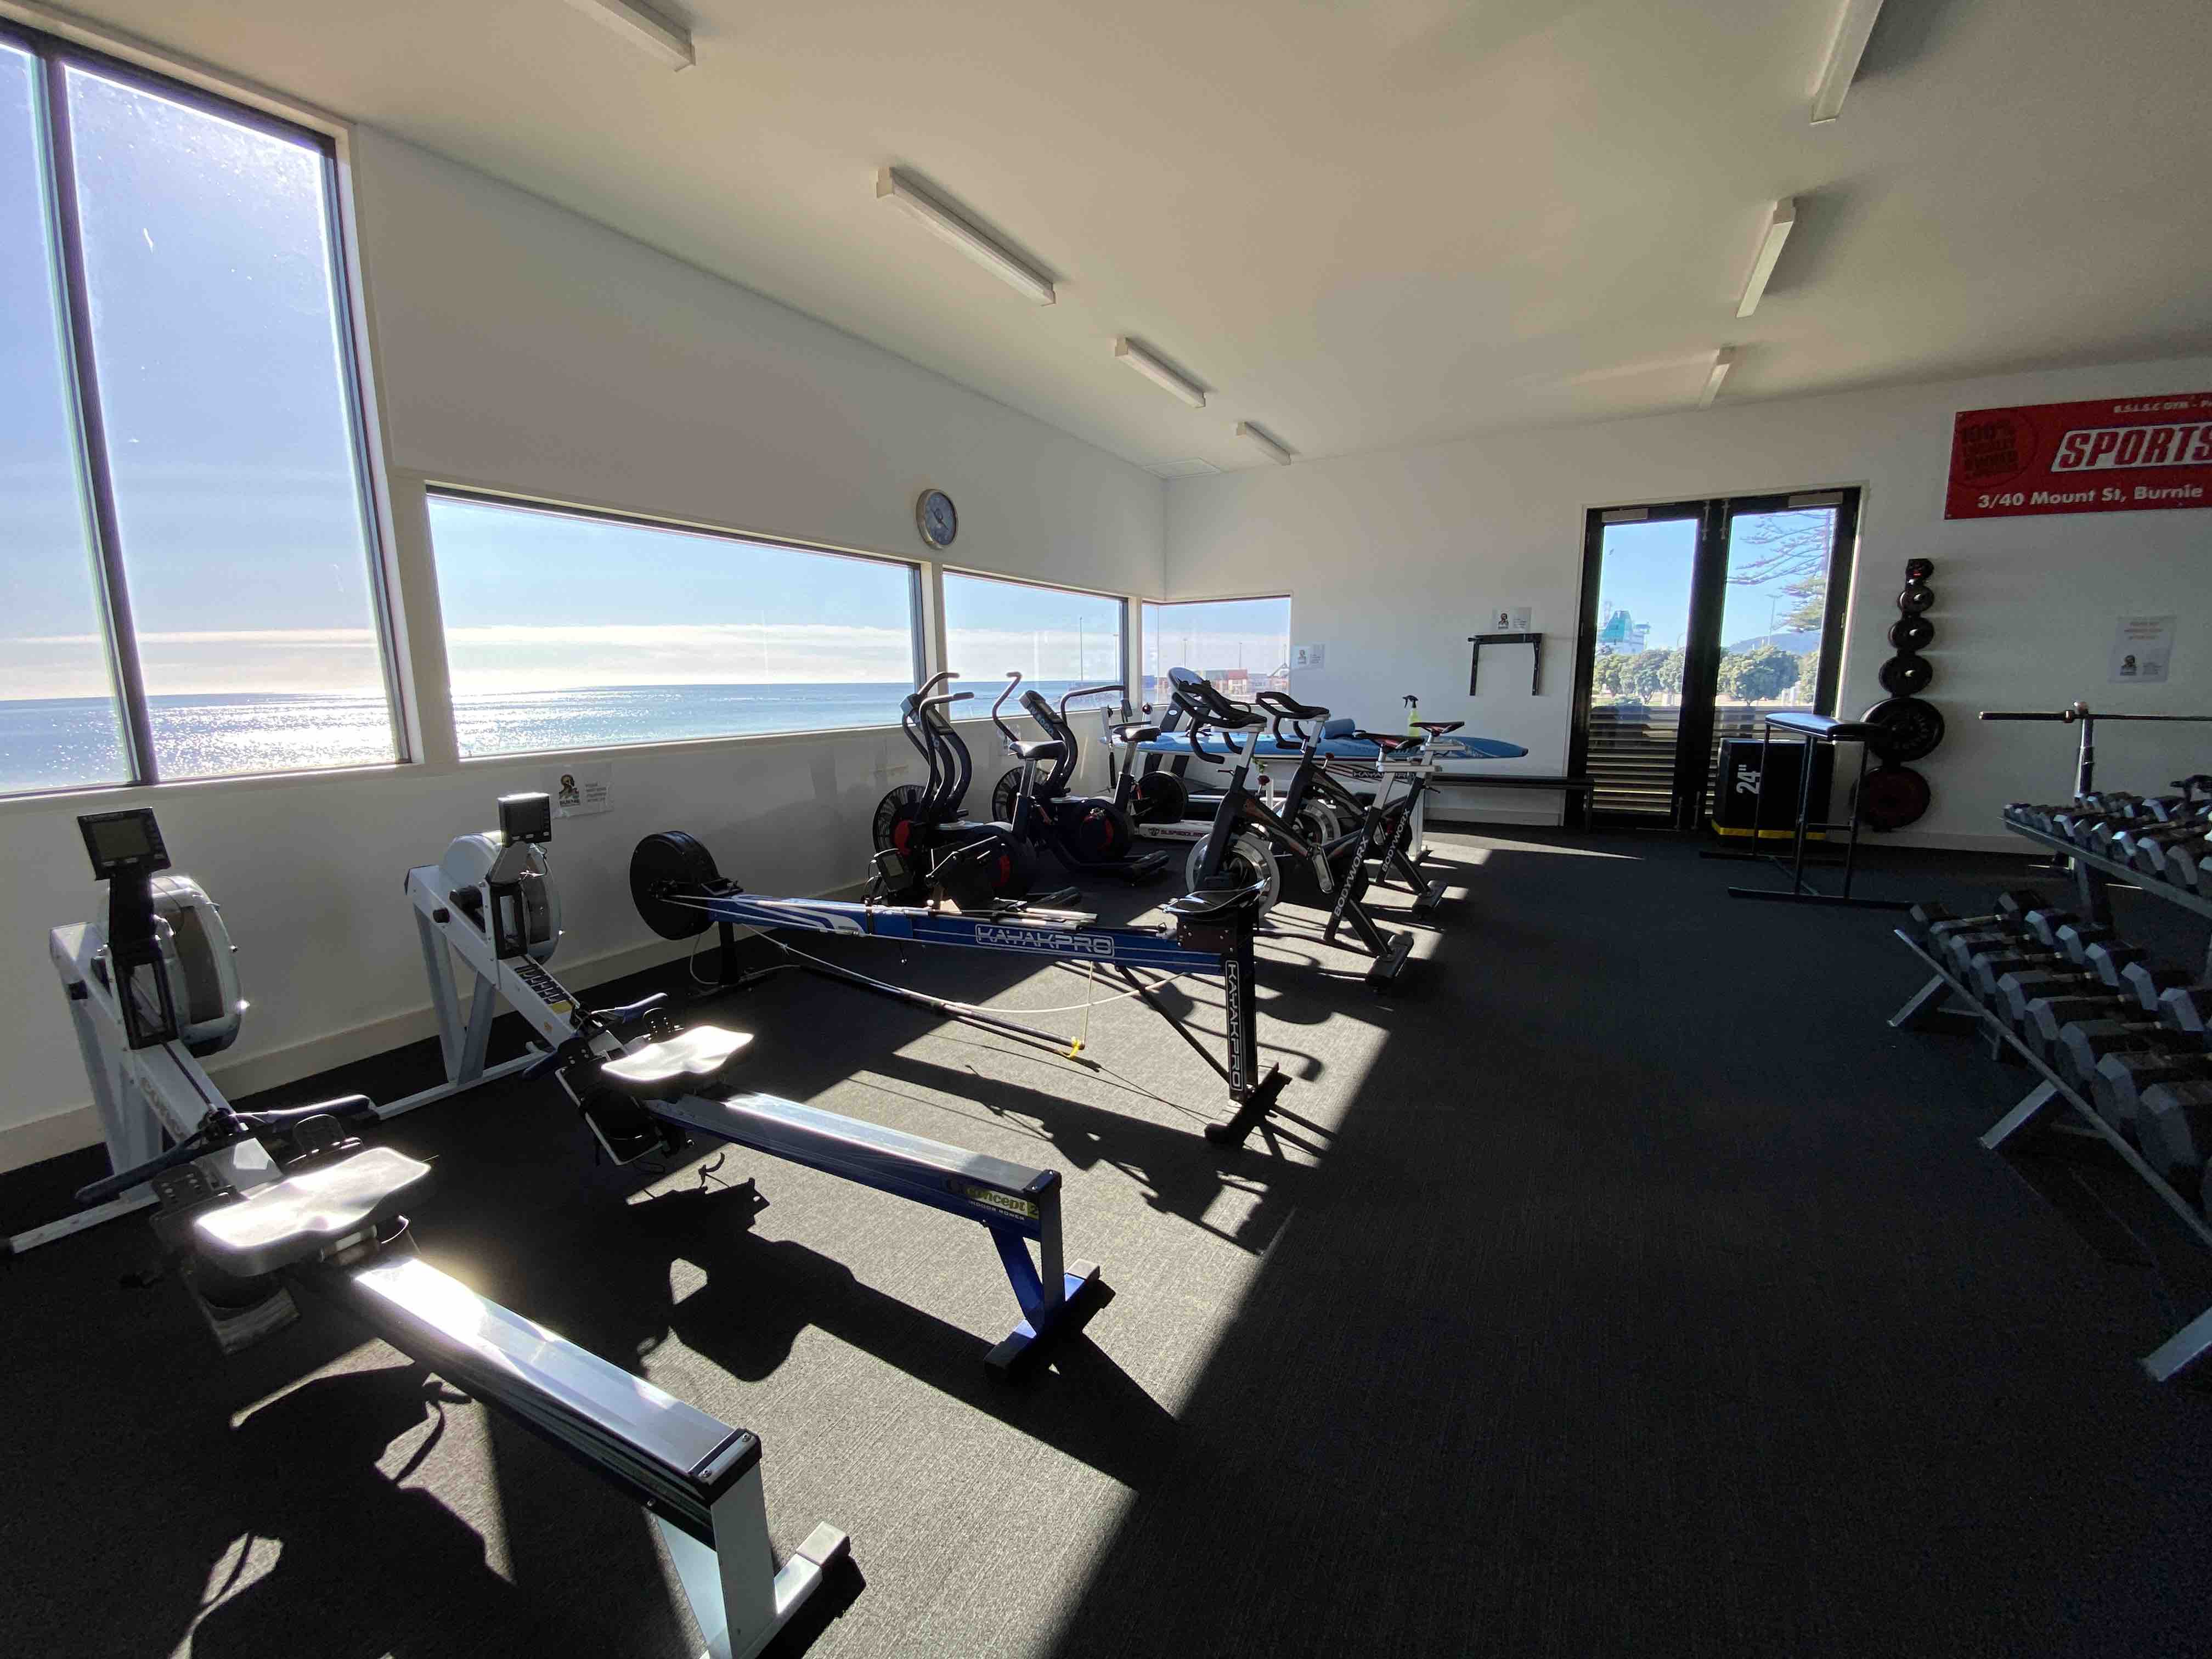 A photo of the Unigym facilities in Burnie